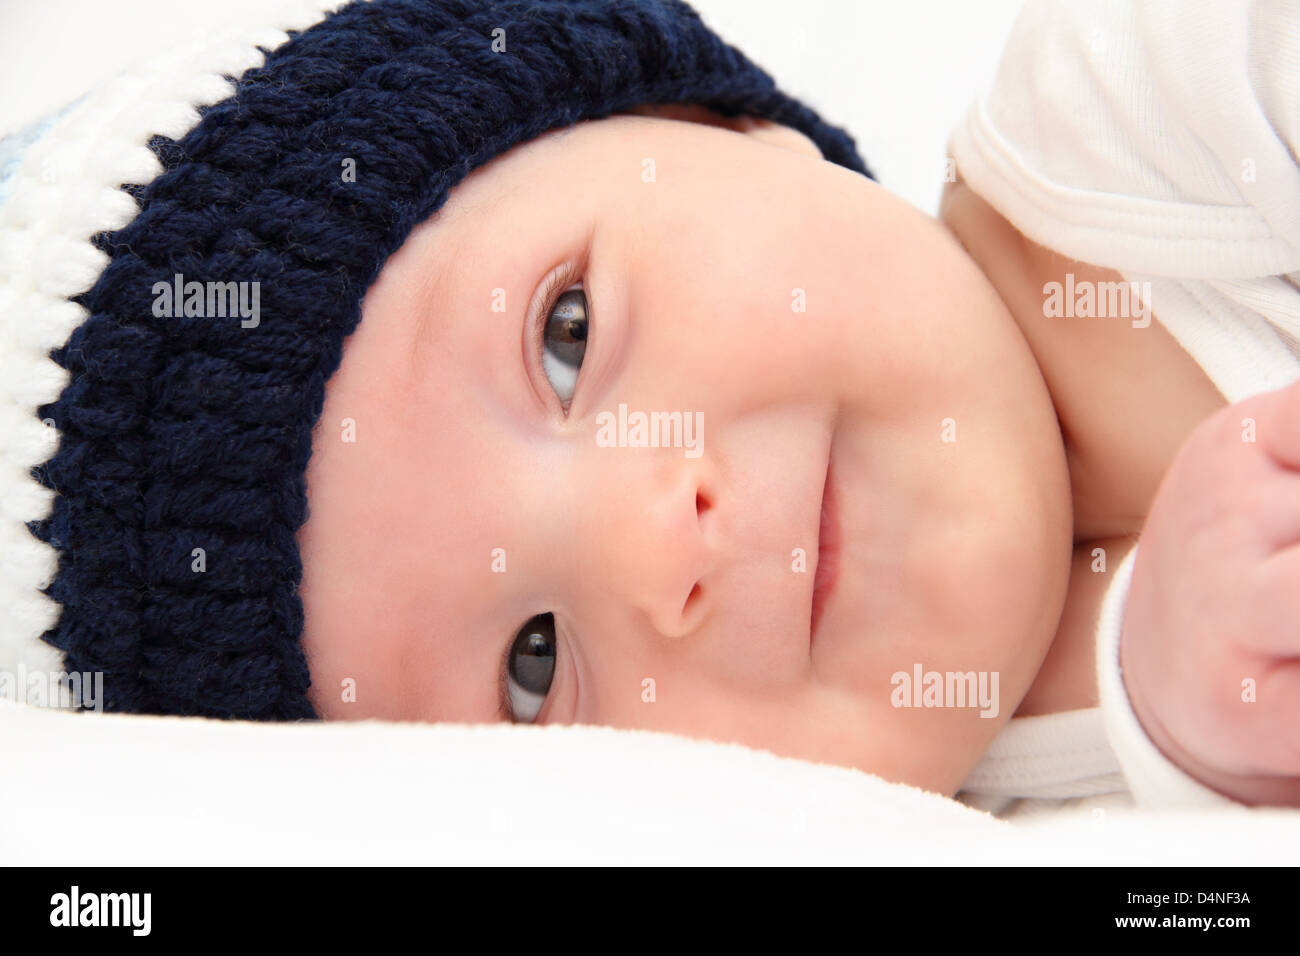 baby in knitted hat Stock Photo